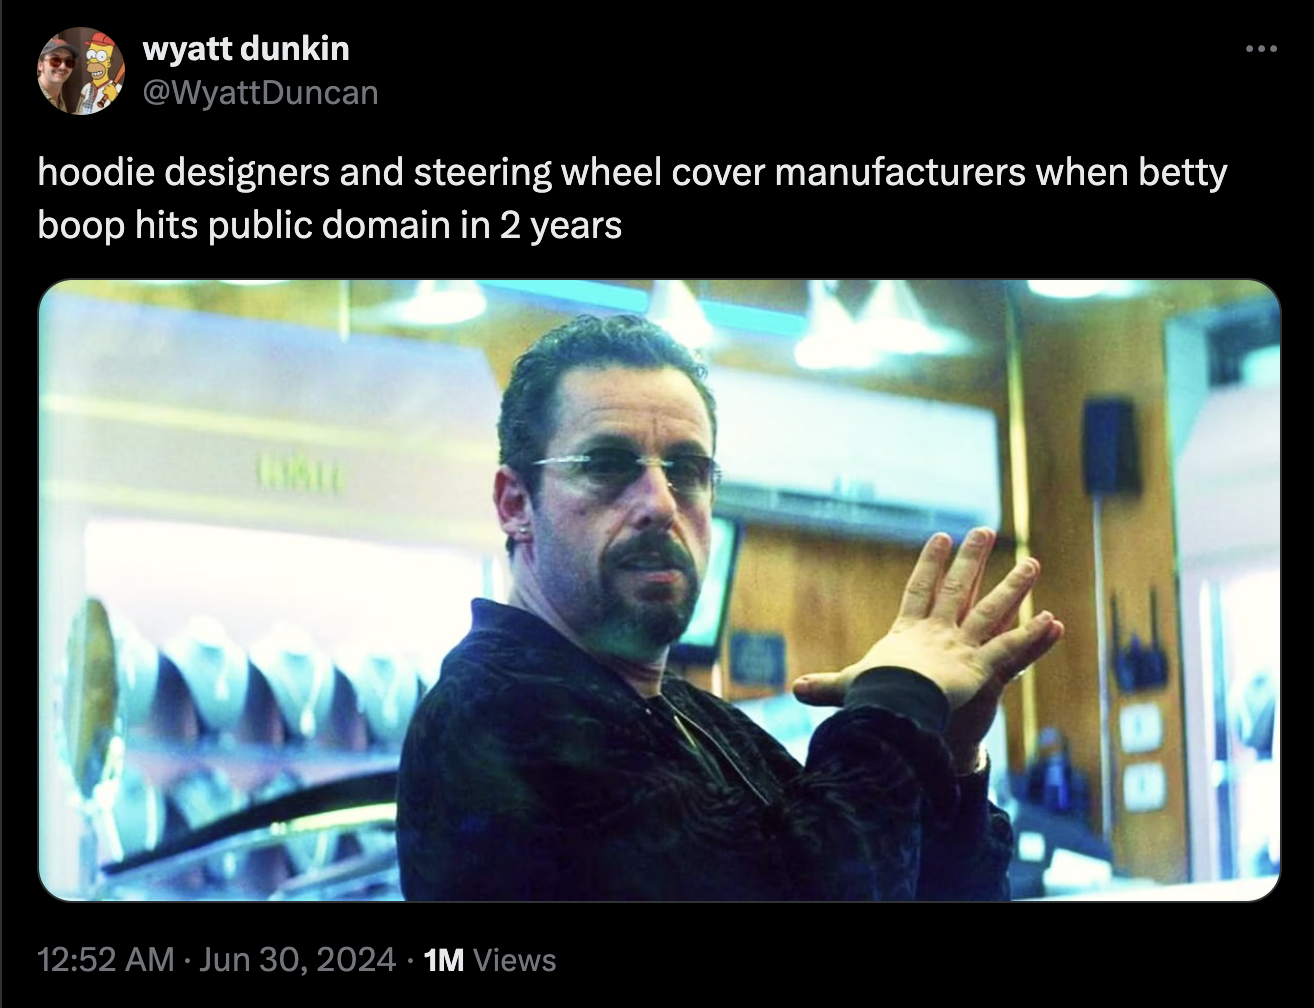 adam sandler serious movie - wyatt dunkin hoodie designers and steering wheel cover manufacturers when betty boop hits public domain in 2 years Wall 1M Views